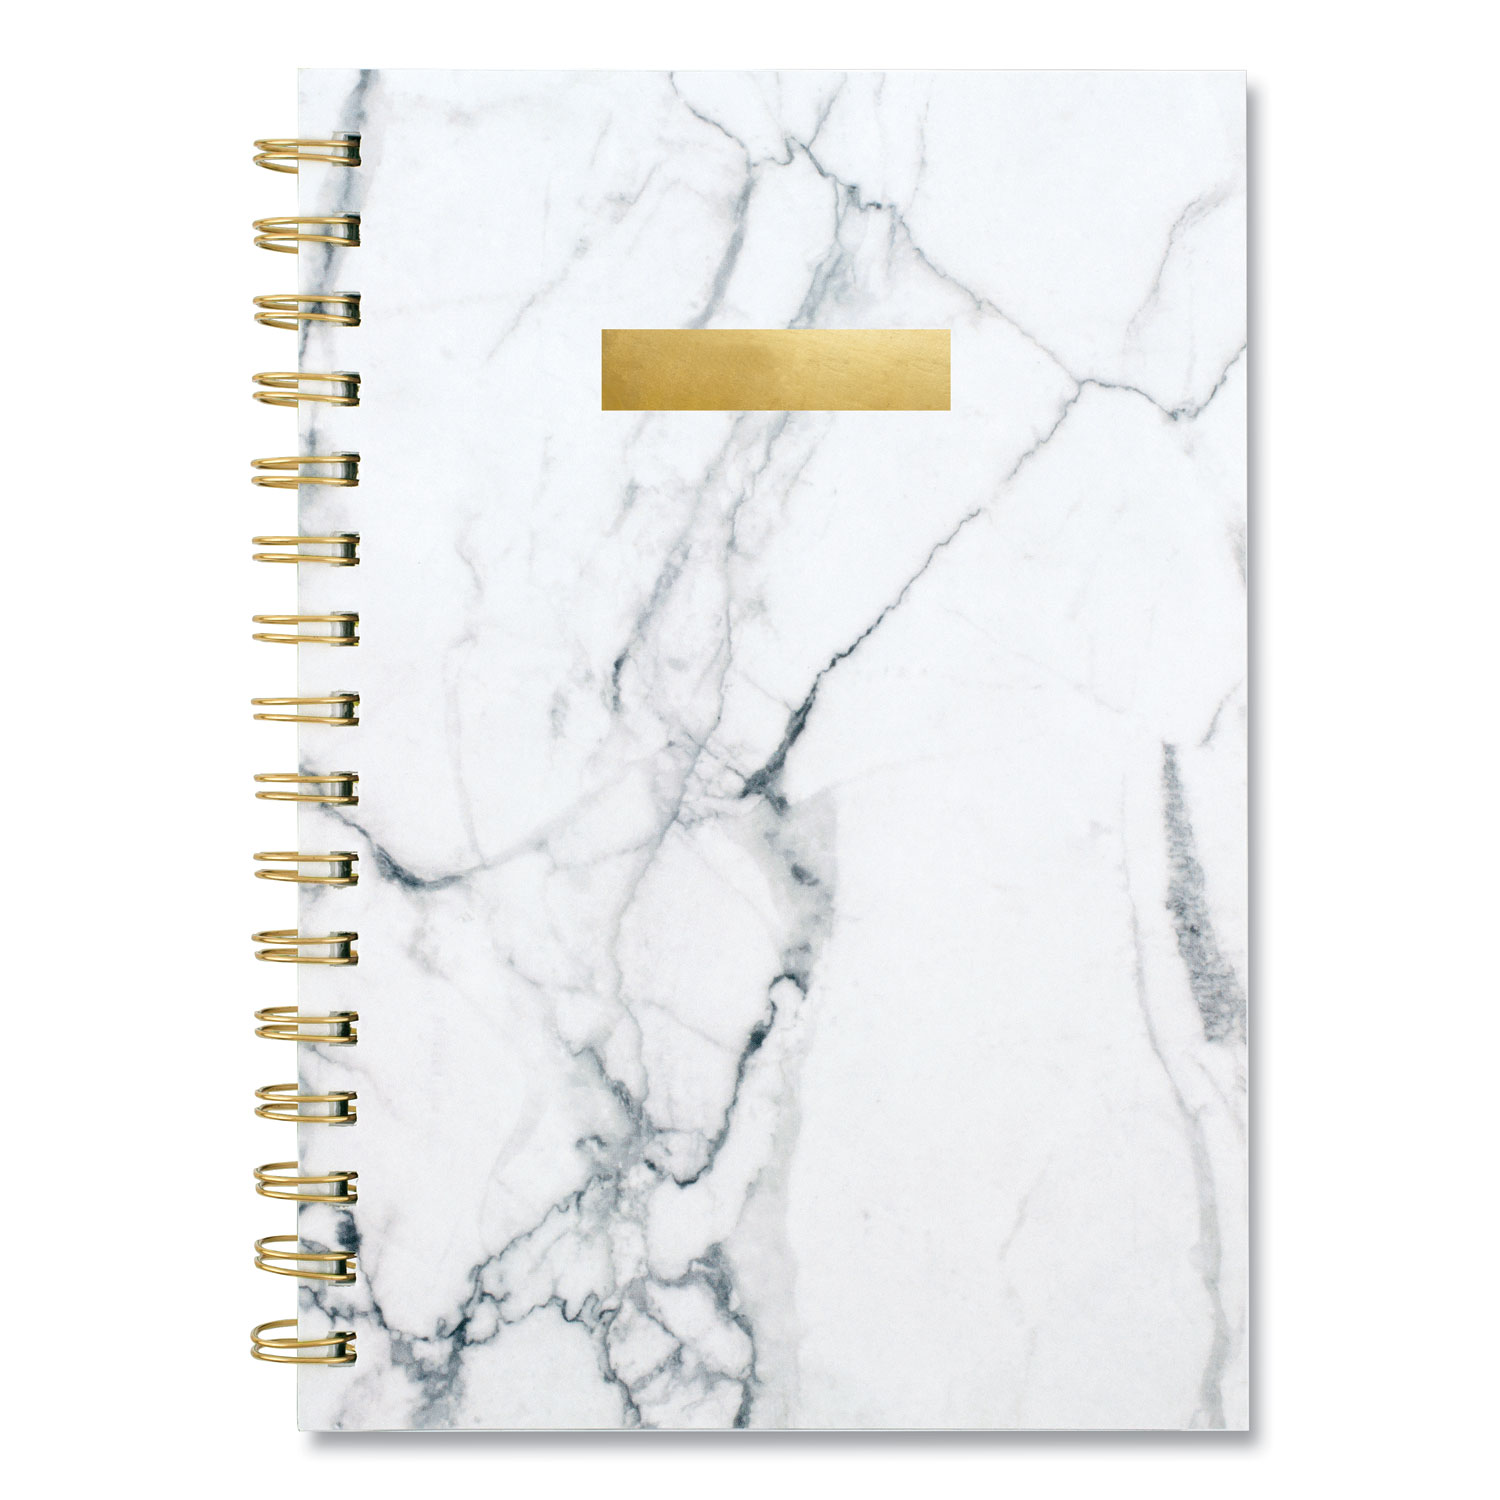  Cambridge 1461200 Bianca Weekly/Monthly Planner, 8.5 x 5.5, Gray Marbled, 2021 (AAG1461200) 